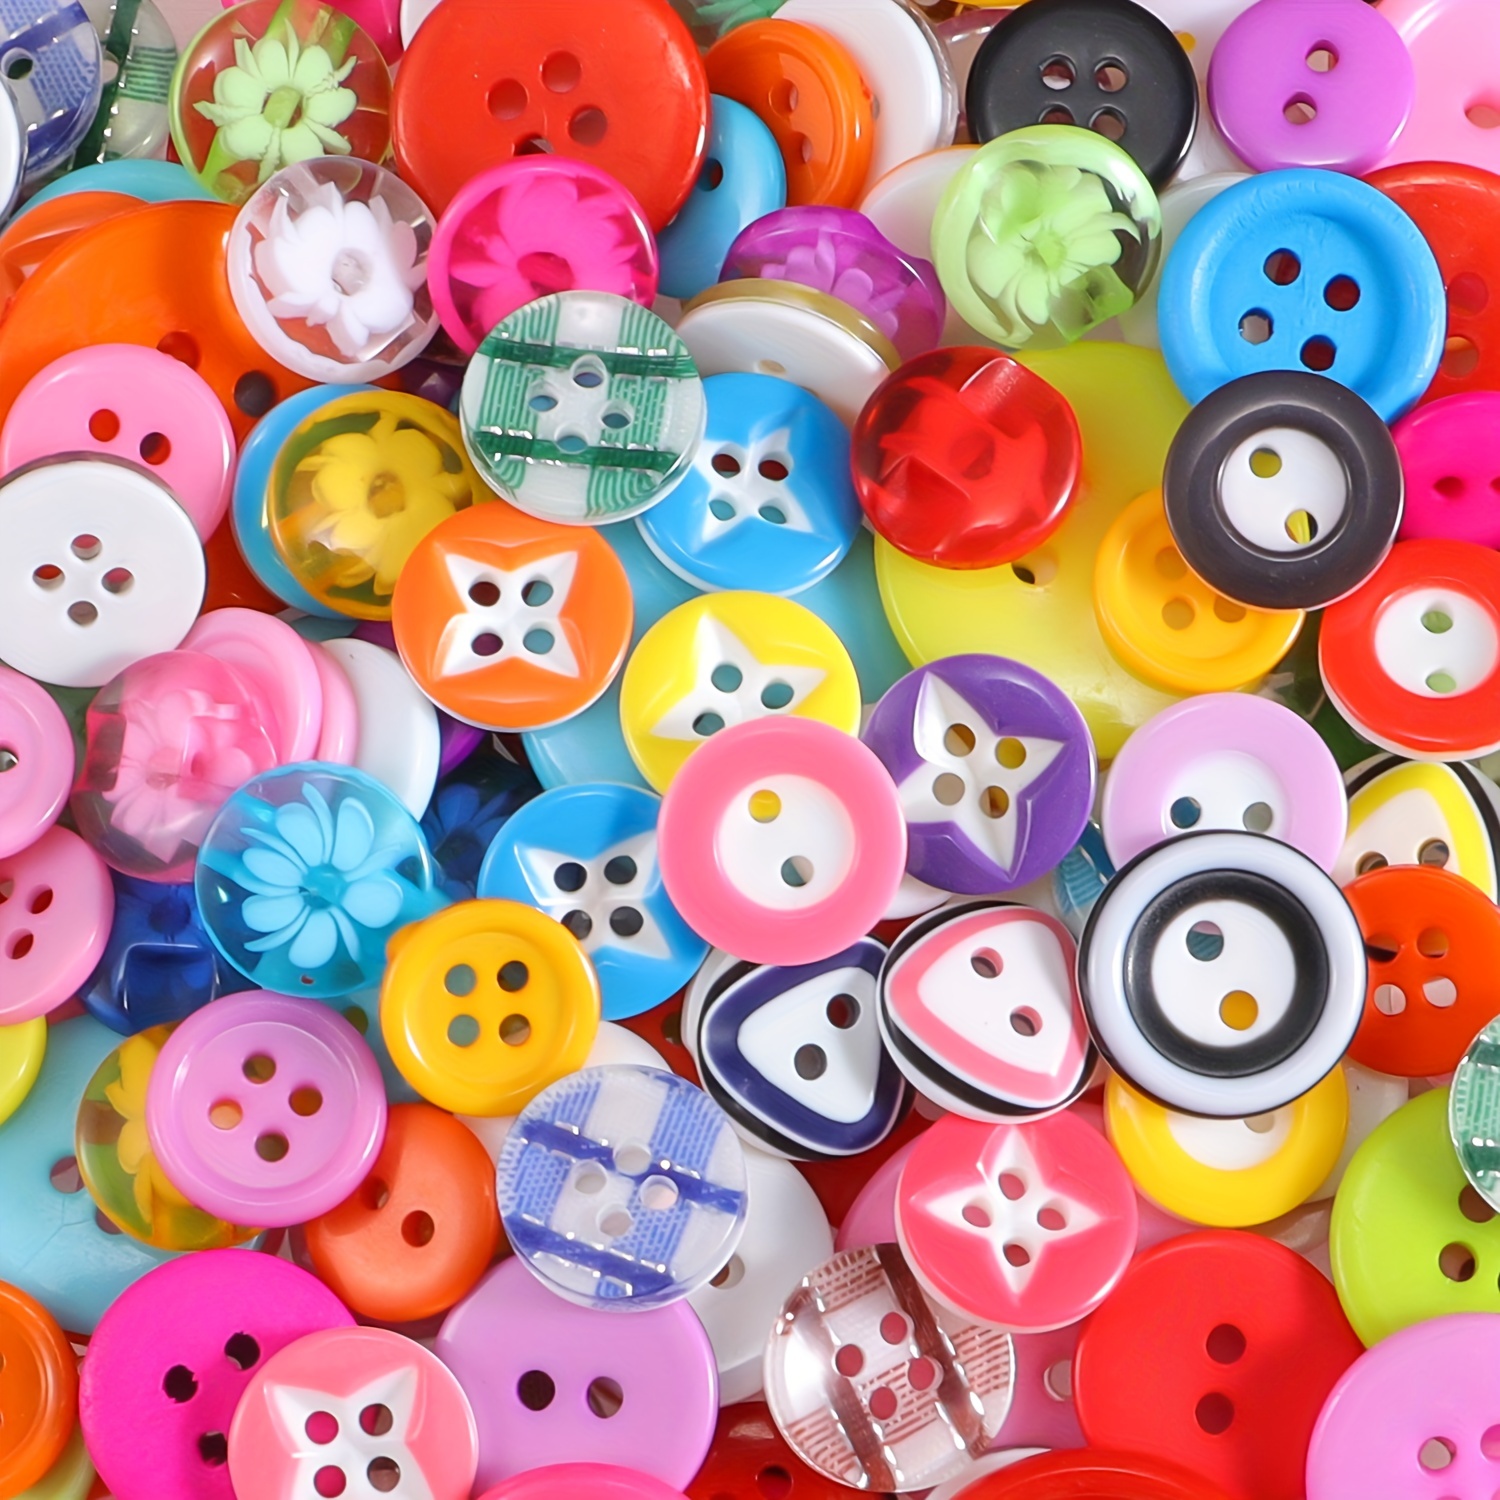 100pcs Mixed Size Round Resin Sewing Buttons For Craft Round Sewing Buttons  Scrapbook Colorful Diy Home Decoration Accessories, Shop Now For  Limited-time Deals